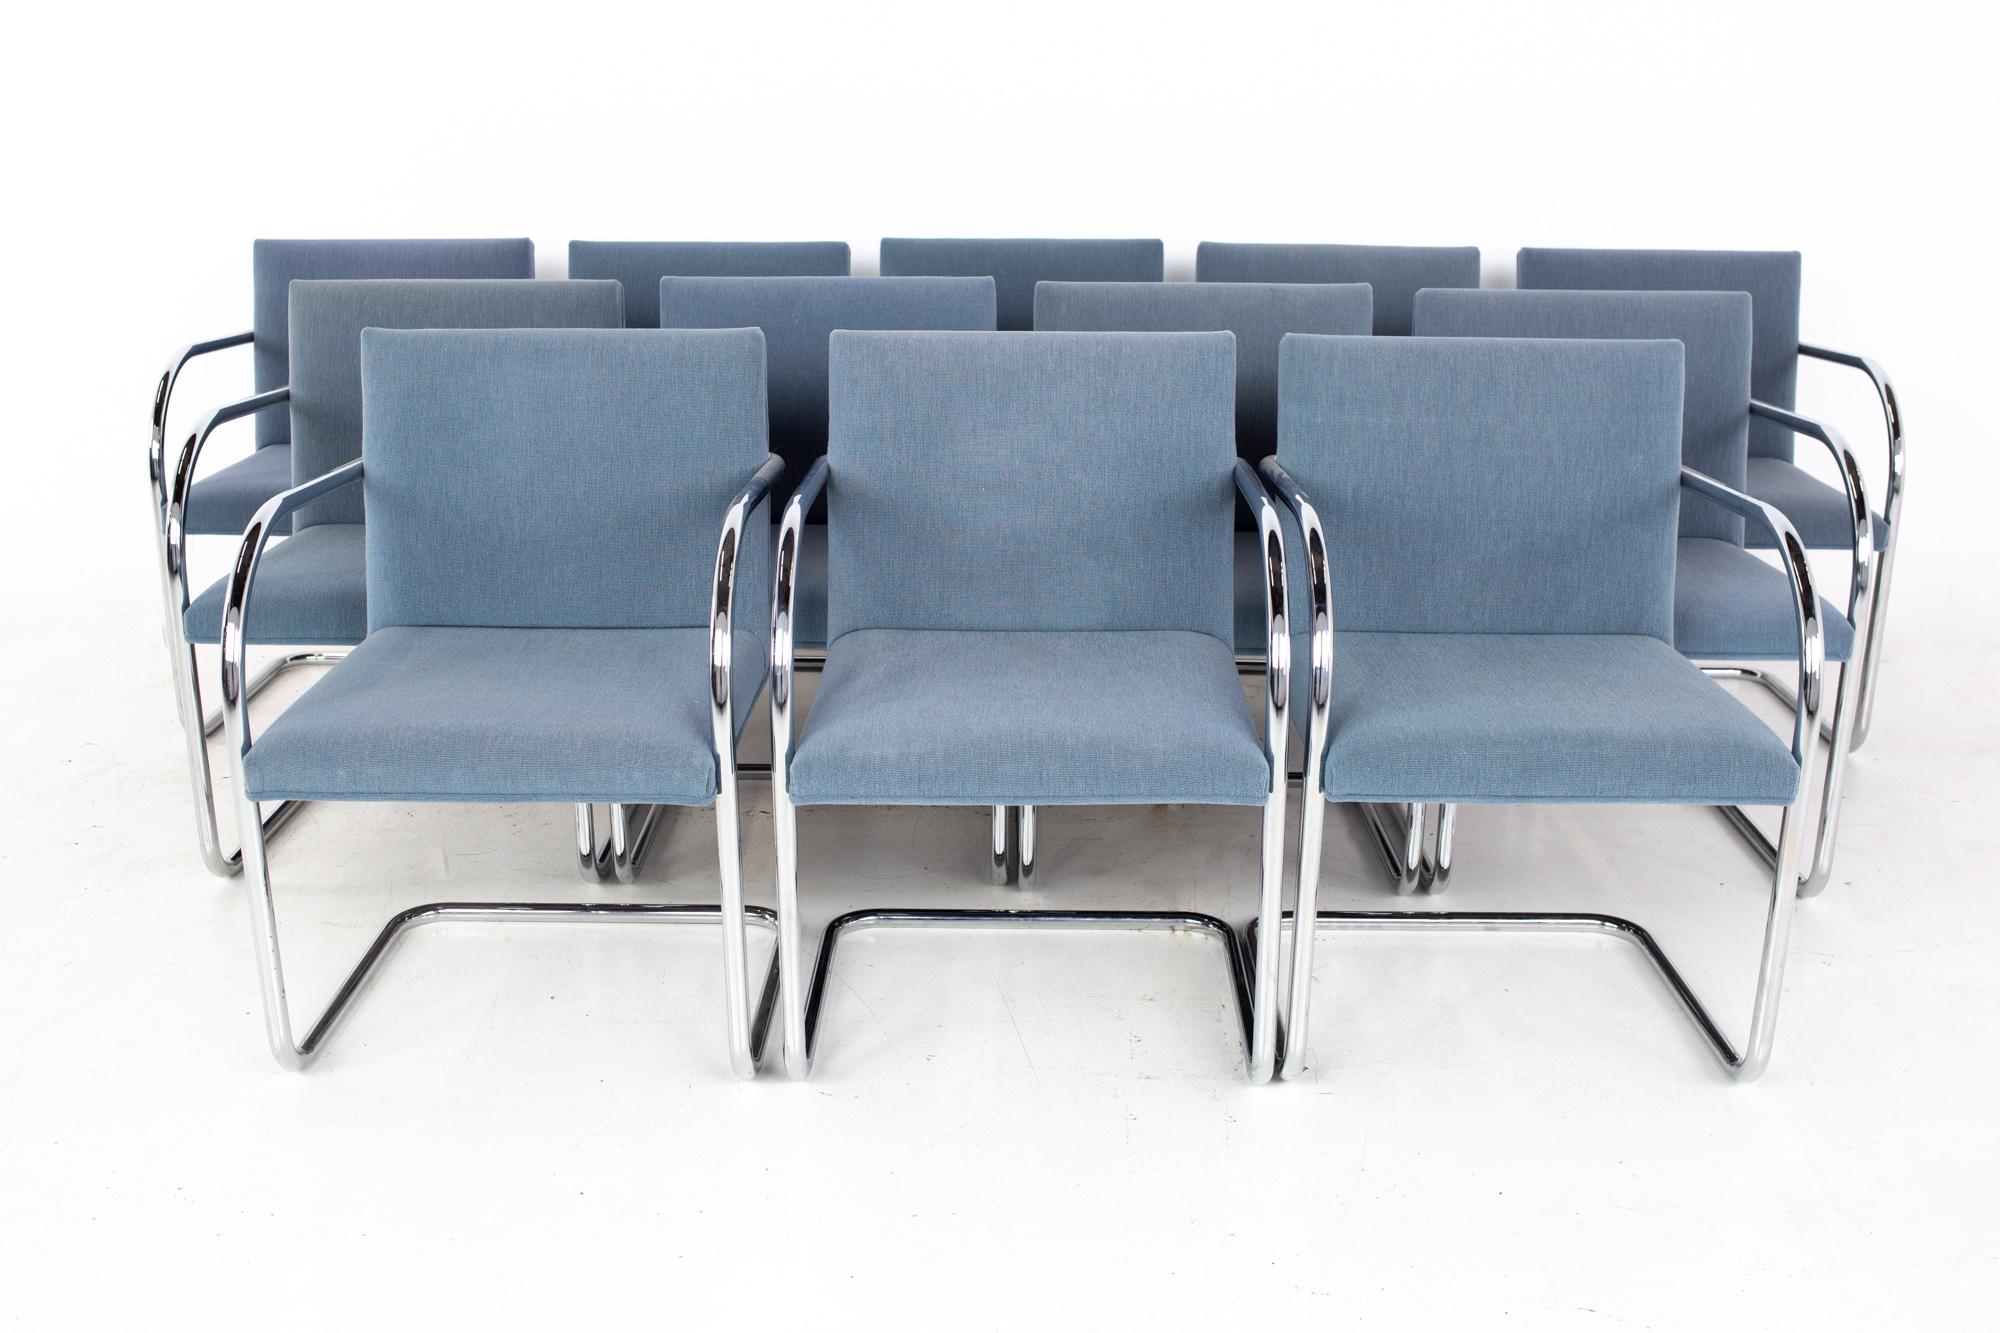 Mies Van Der Rohe for Gordon International BRNO mid century Tubular occasional arm chair - Set of 8
Each chair measures: 21.75 wide x 23 deep x 31.5 high, with a seat height of 18 inches and arm height of 26 inches

All pieces of furniture can be